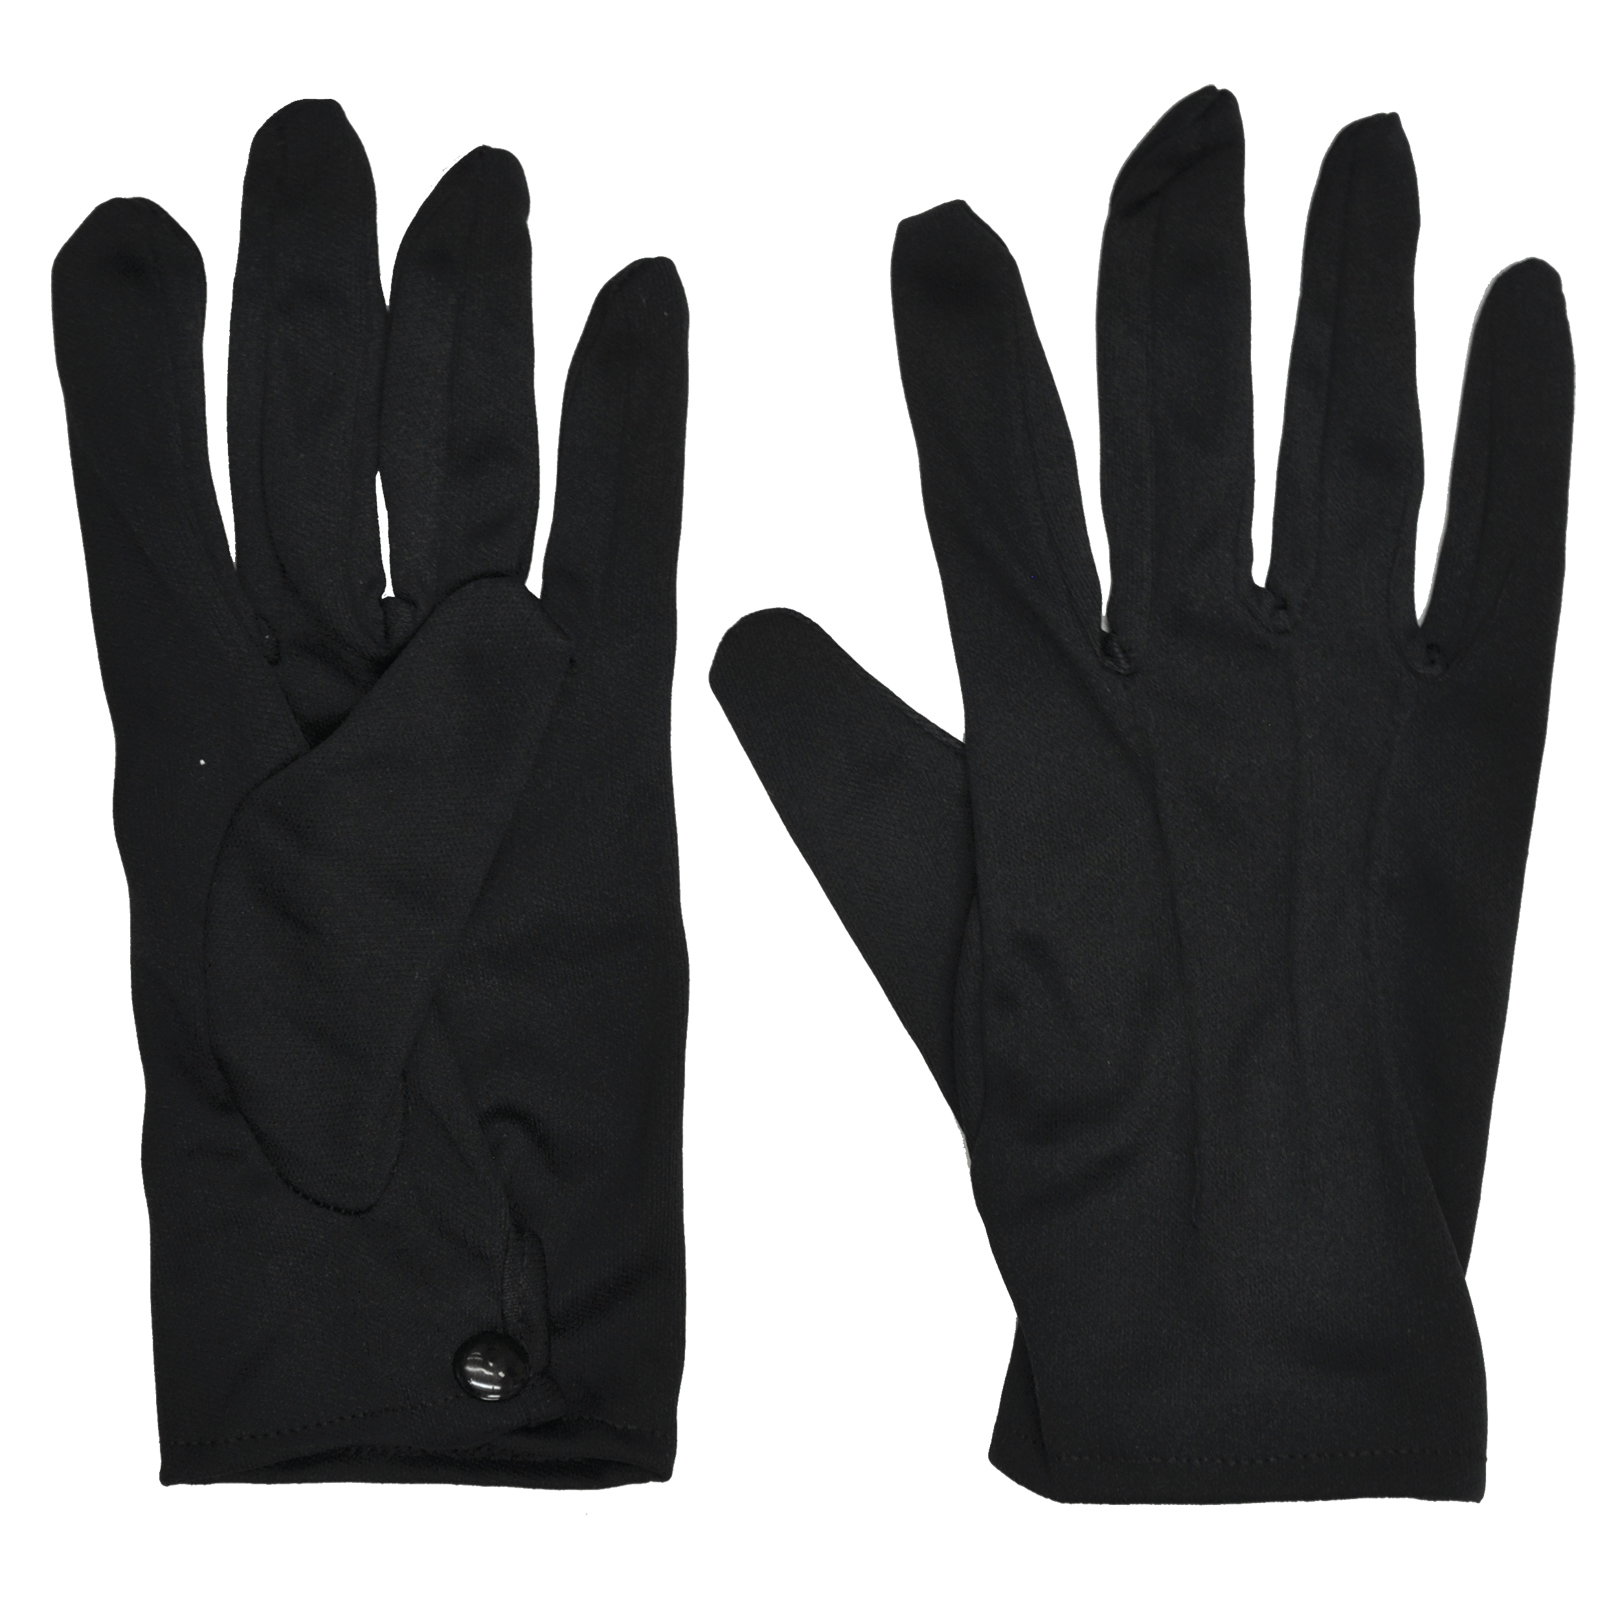 Gloves Theatrical with Snap Black Costume Accessory